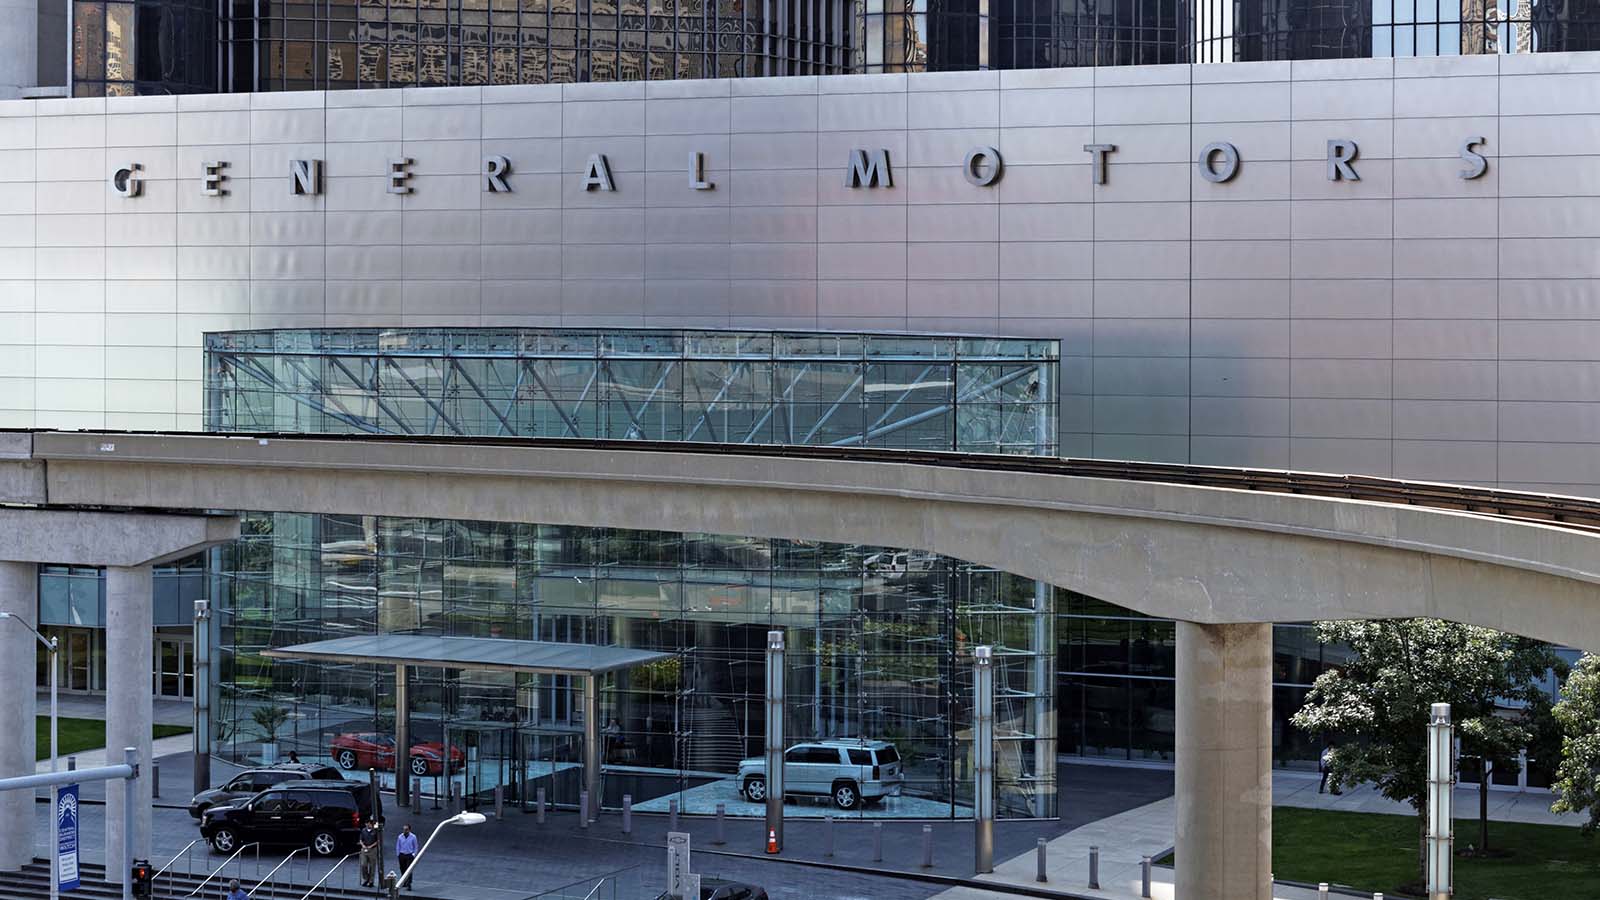 General Motors (GM) spelled out on front of silver-colored building